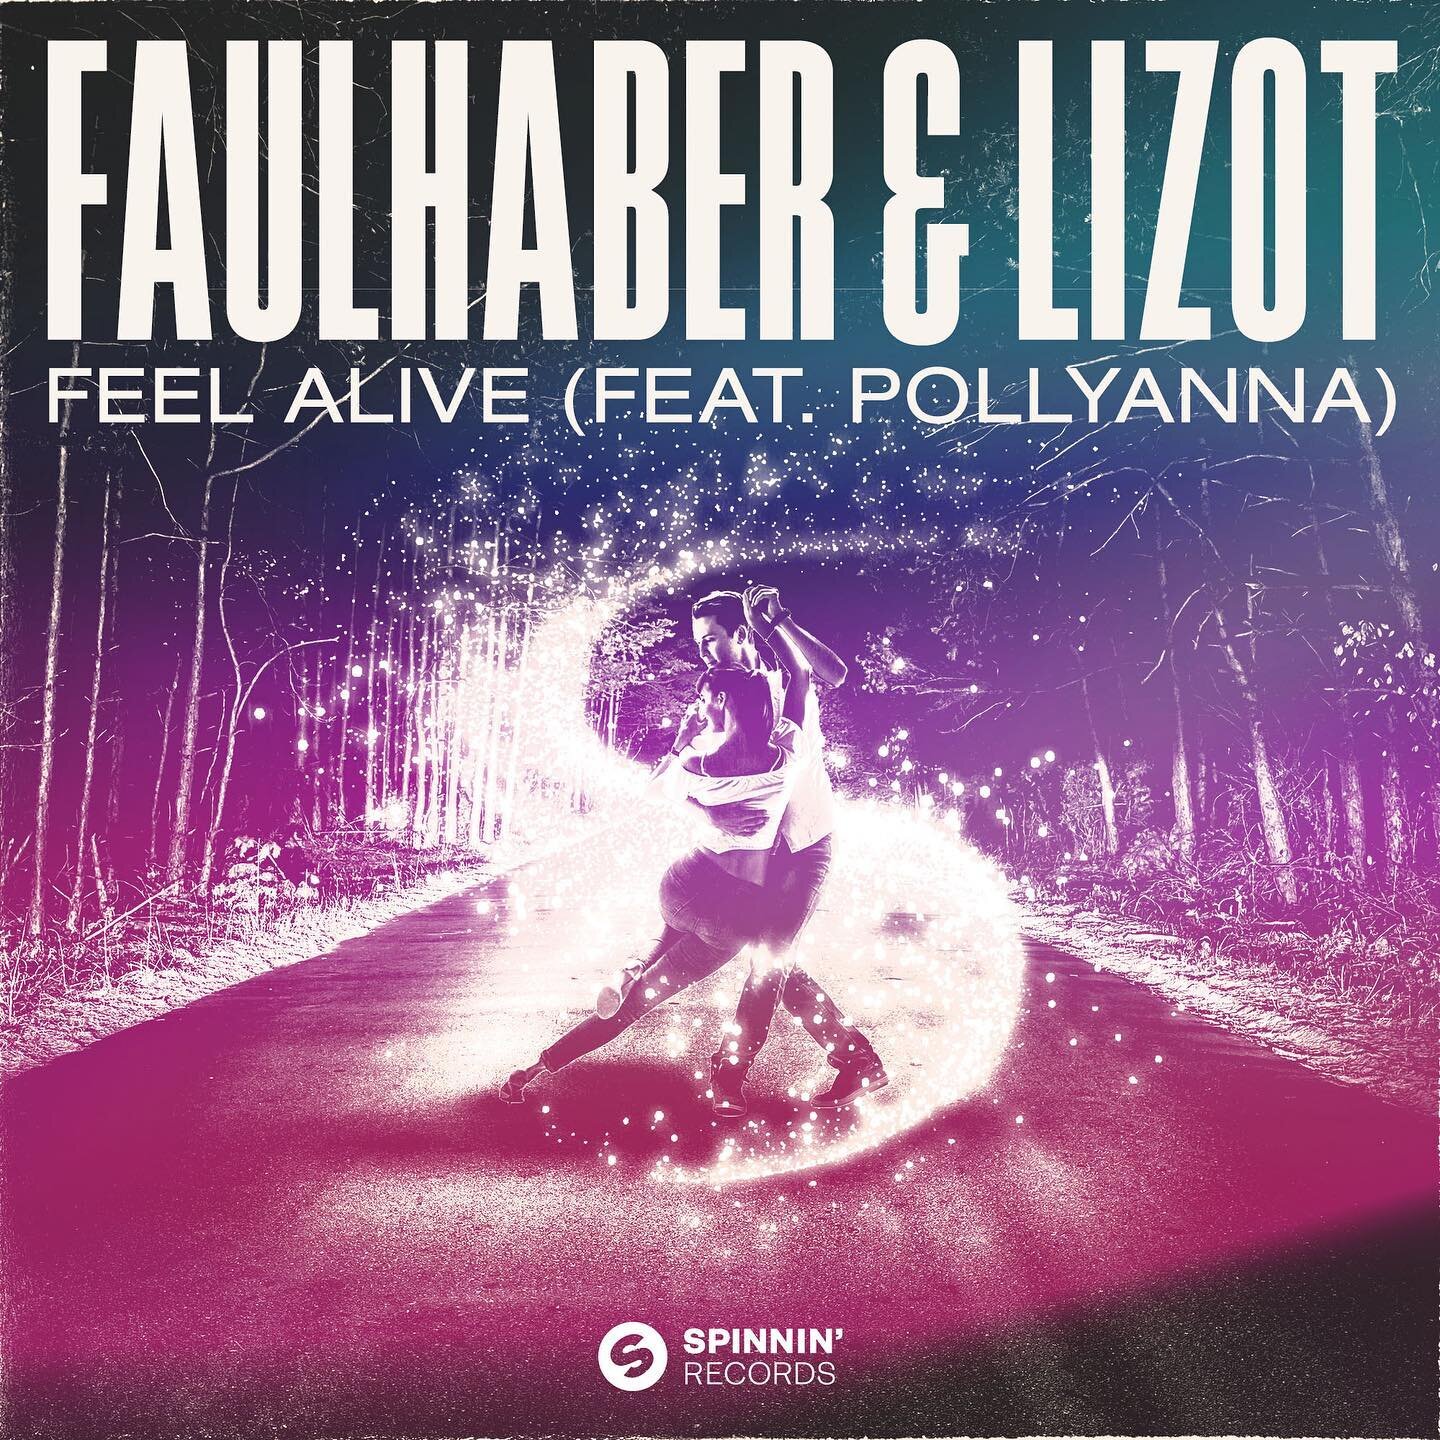 NEW MUSIC is coming and it&rsquo;s my BIRTHDAY! 🥳

FEEL ALIVE together with @lizot_official &amp; @pollyannaofficial will be out this Friday! Super excited for this one!! Pre-save link in bio ❤️